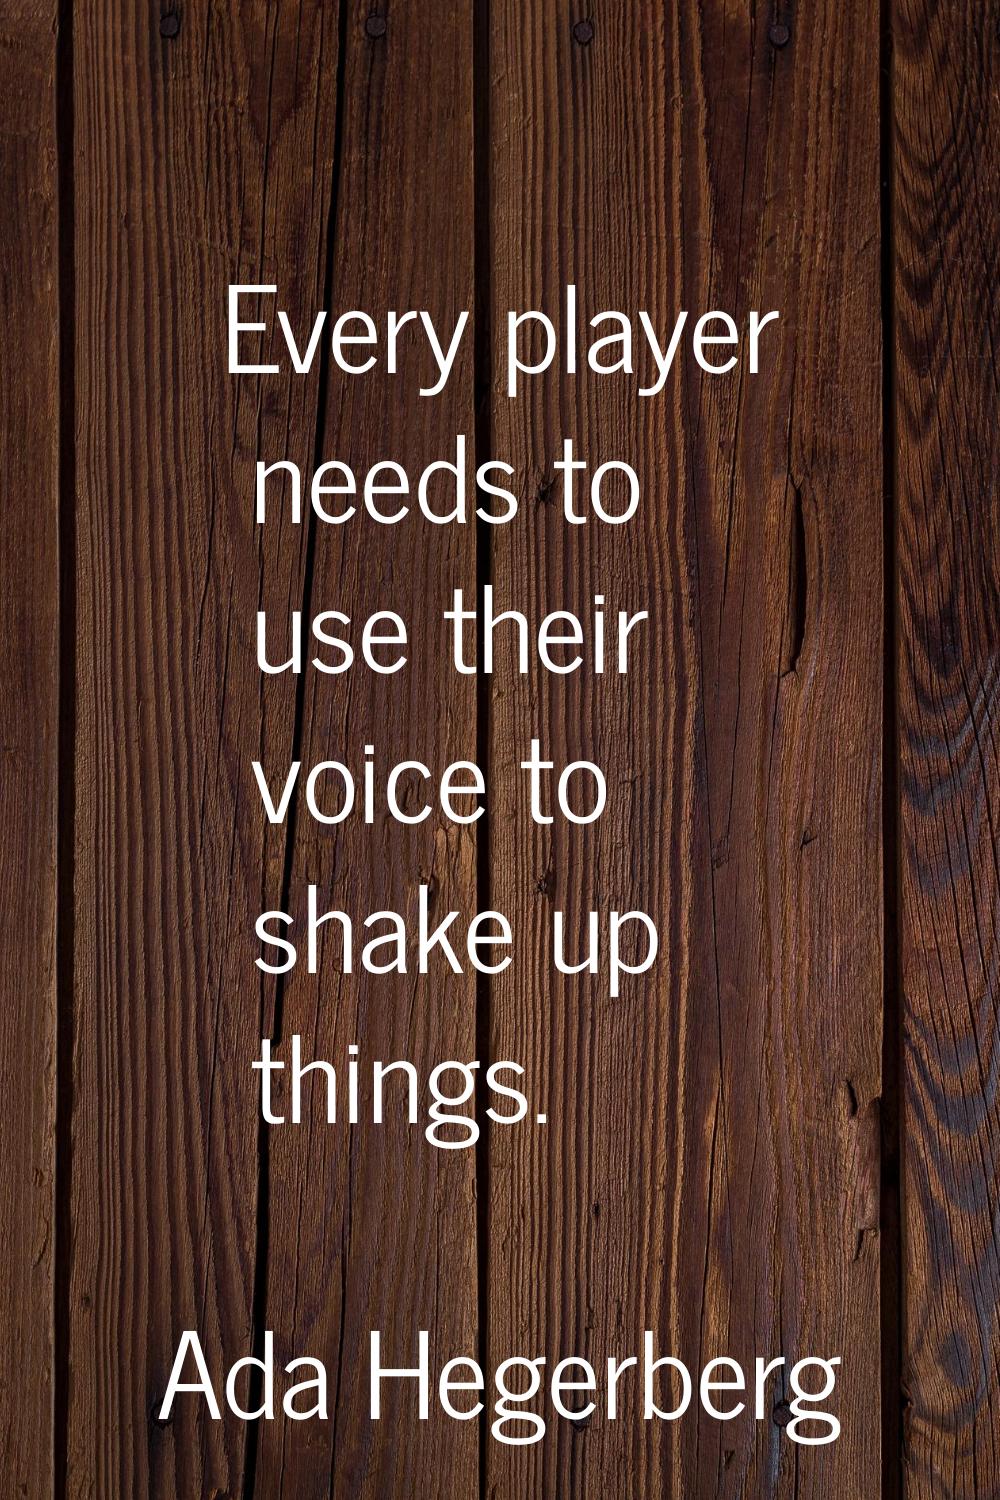 Every player needs to use their voice to shake up things.